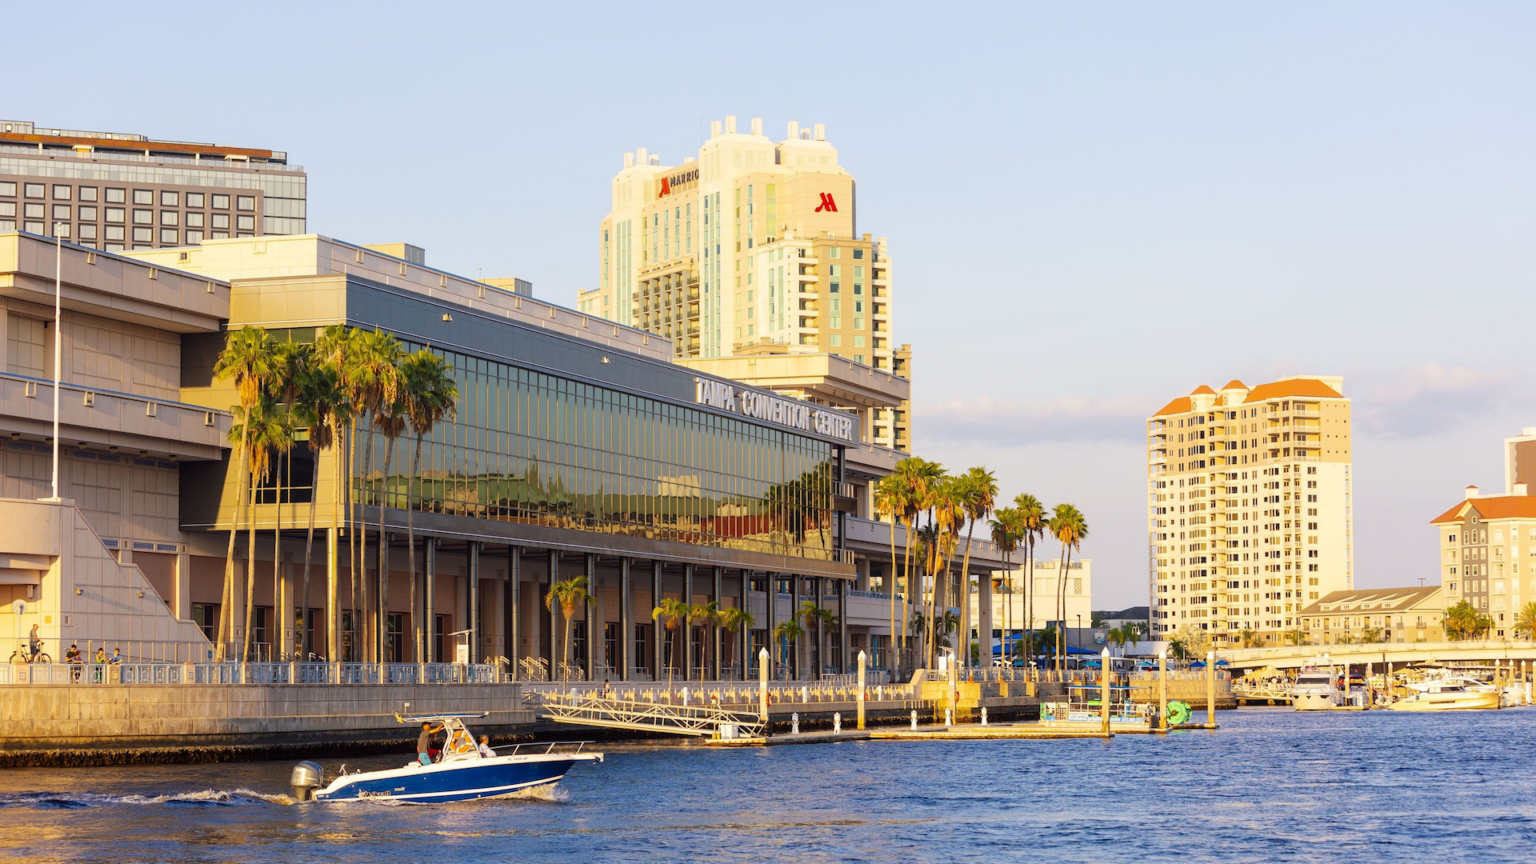 Tampa Convention Center completes $44 5 million expansion That s So Tampa